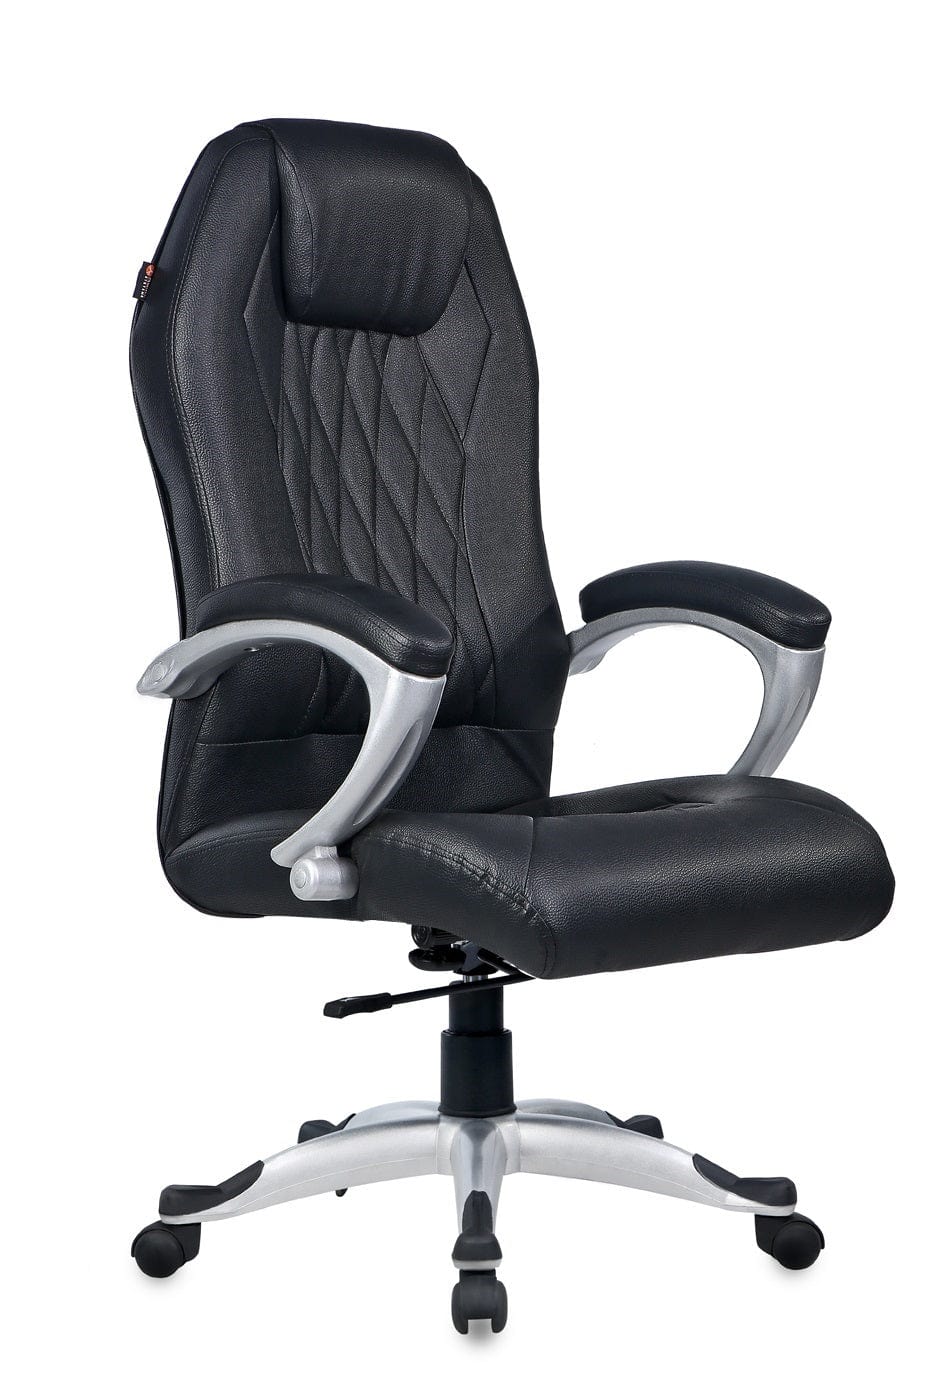 Classic High Back Executive Revolving Chair in Black